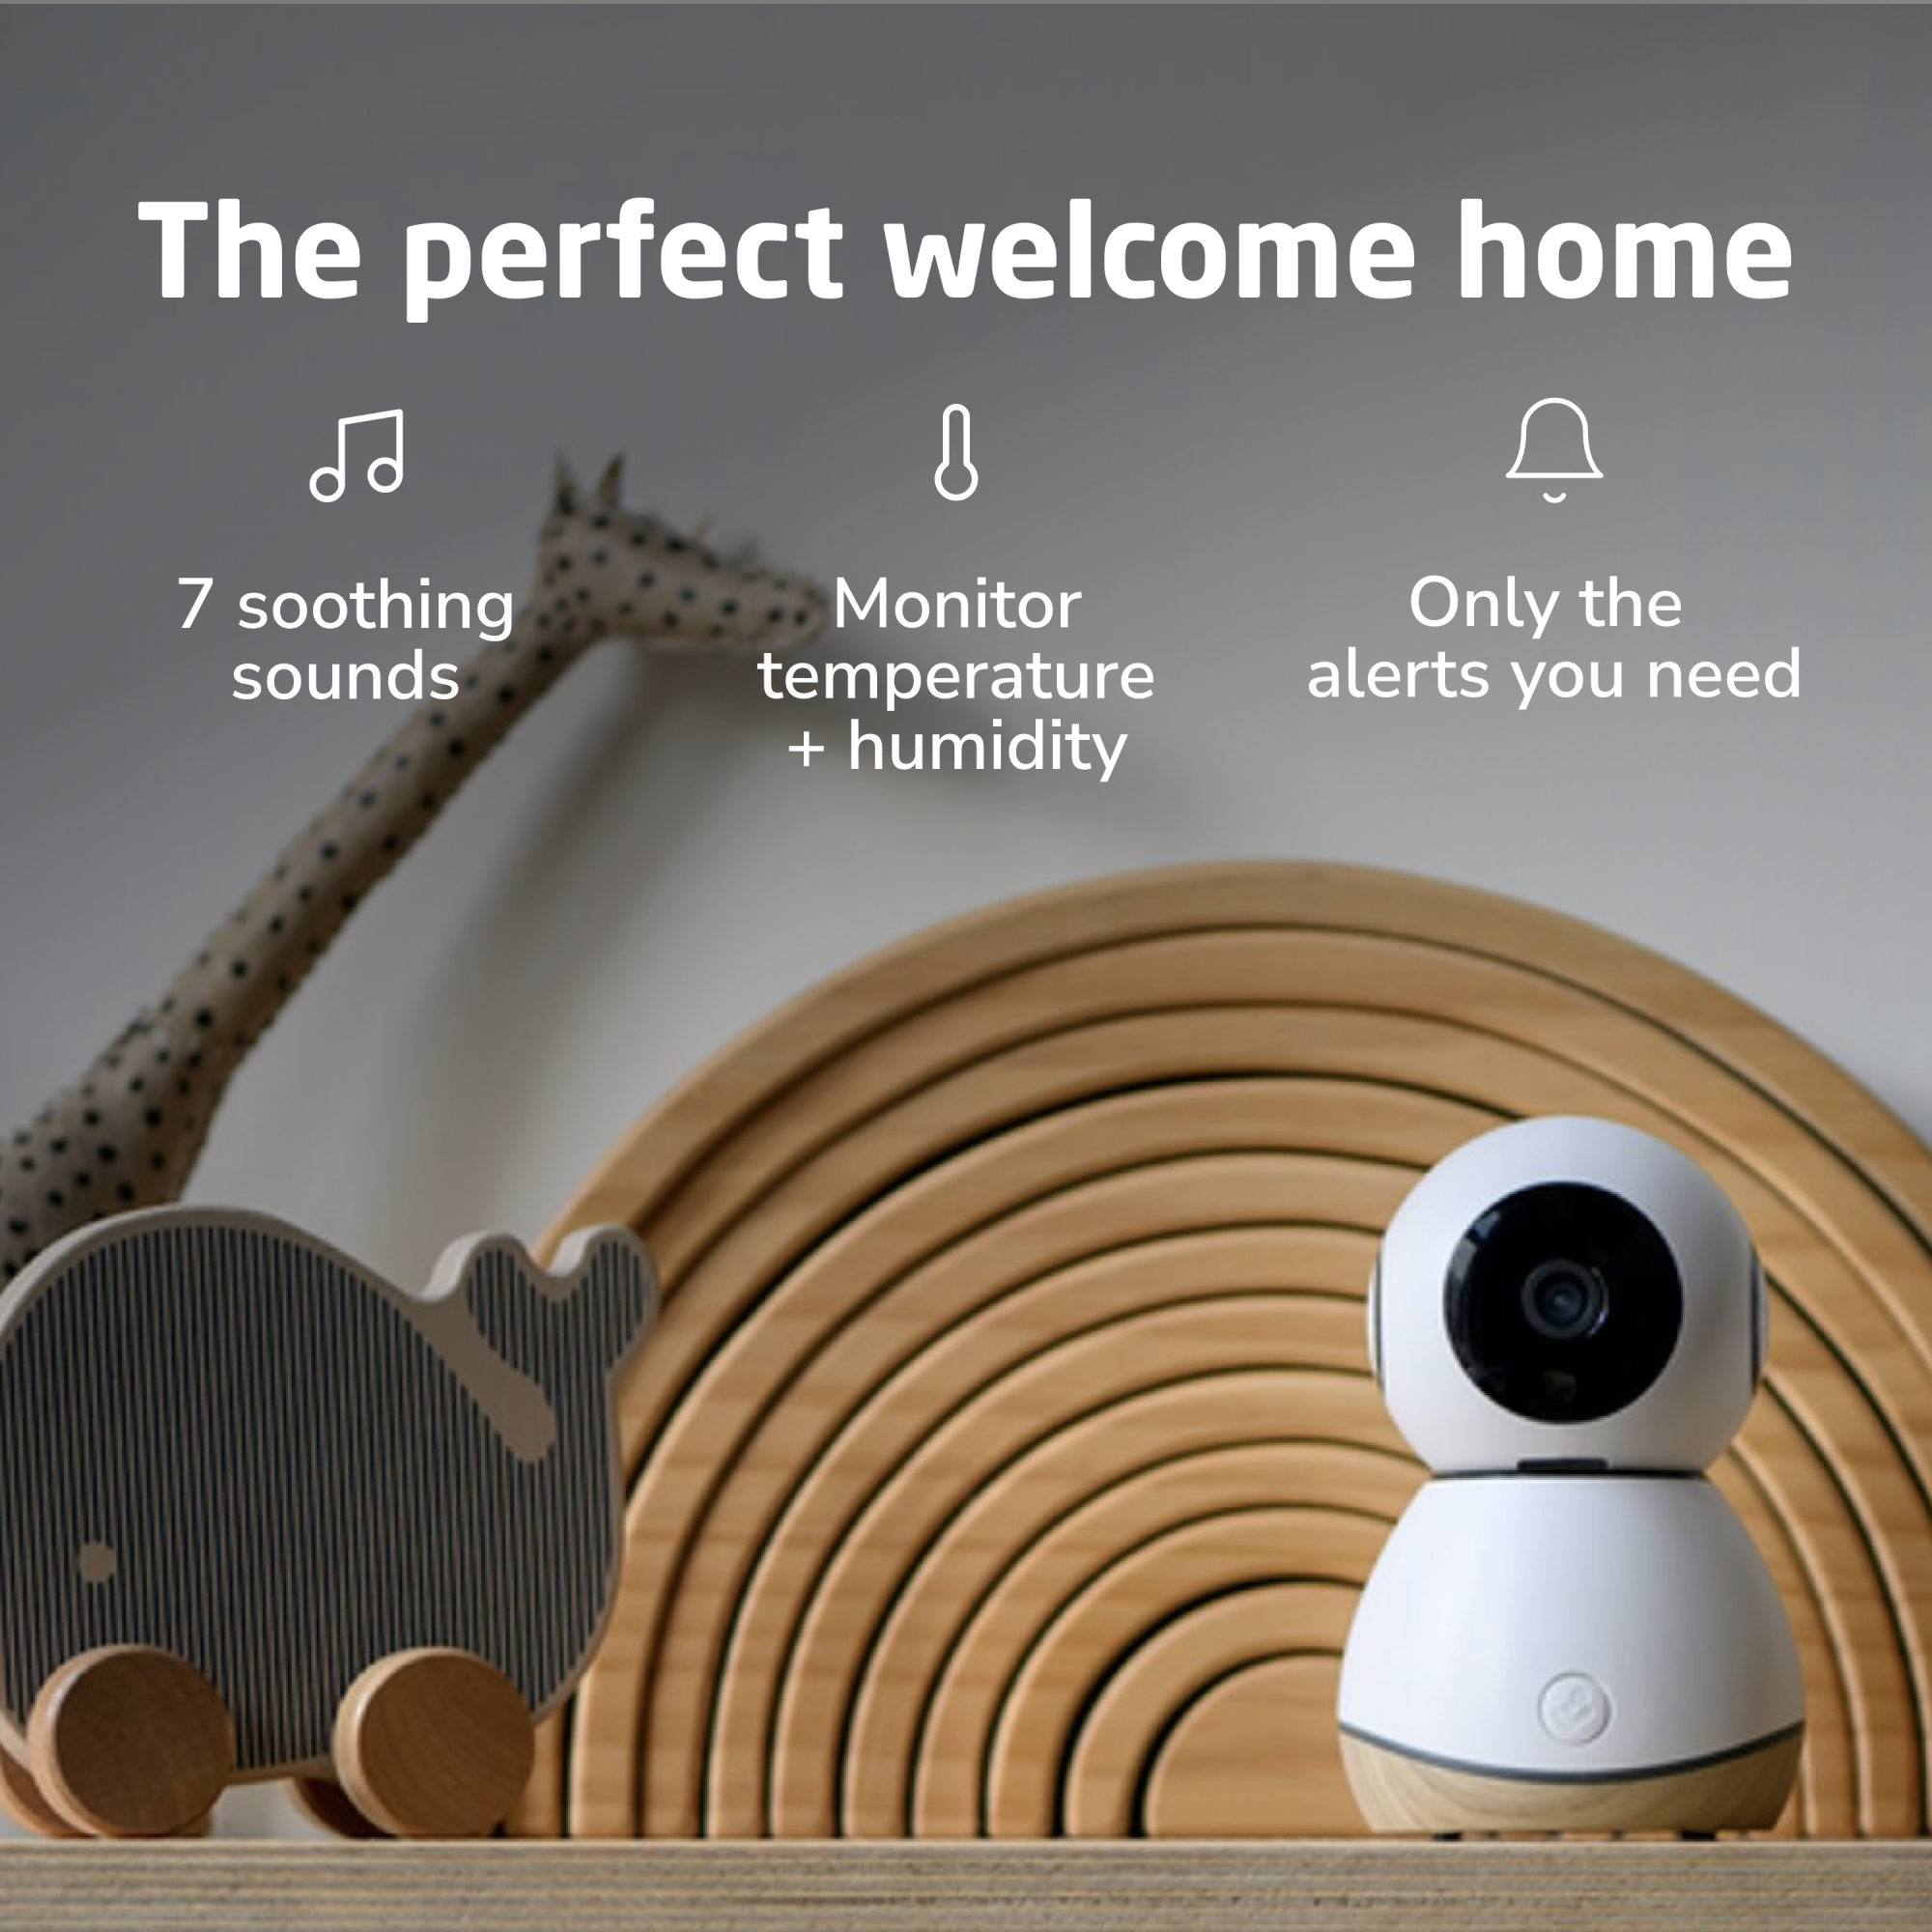 See Pro 360° Baby Monitor - The perfect welcome home - 7 soothing sounds, monitor temperature + humidity, only the alerts you need